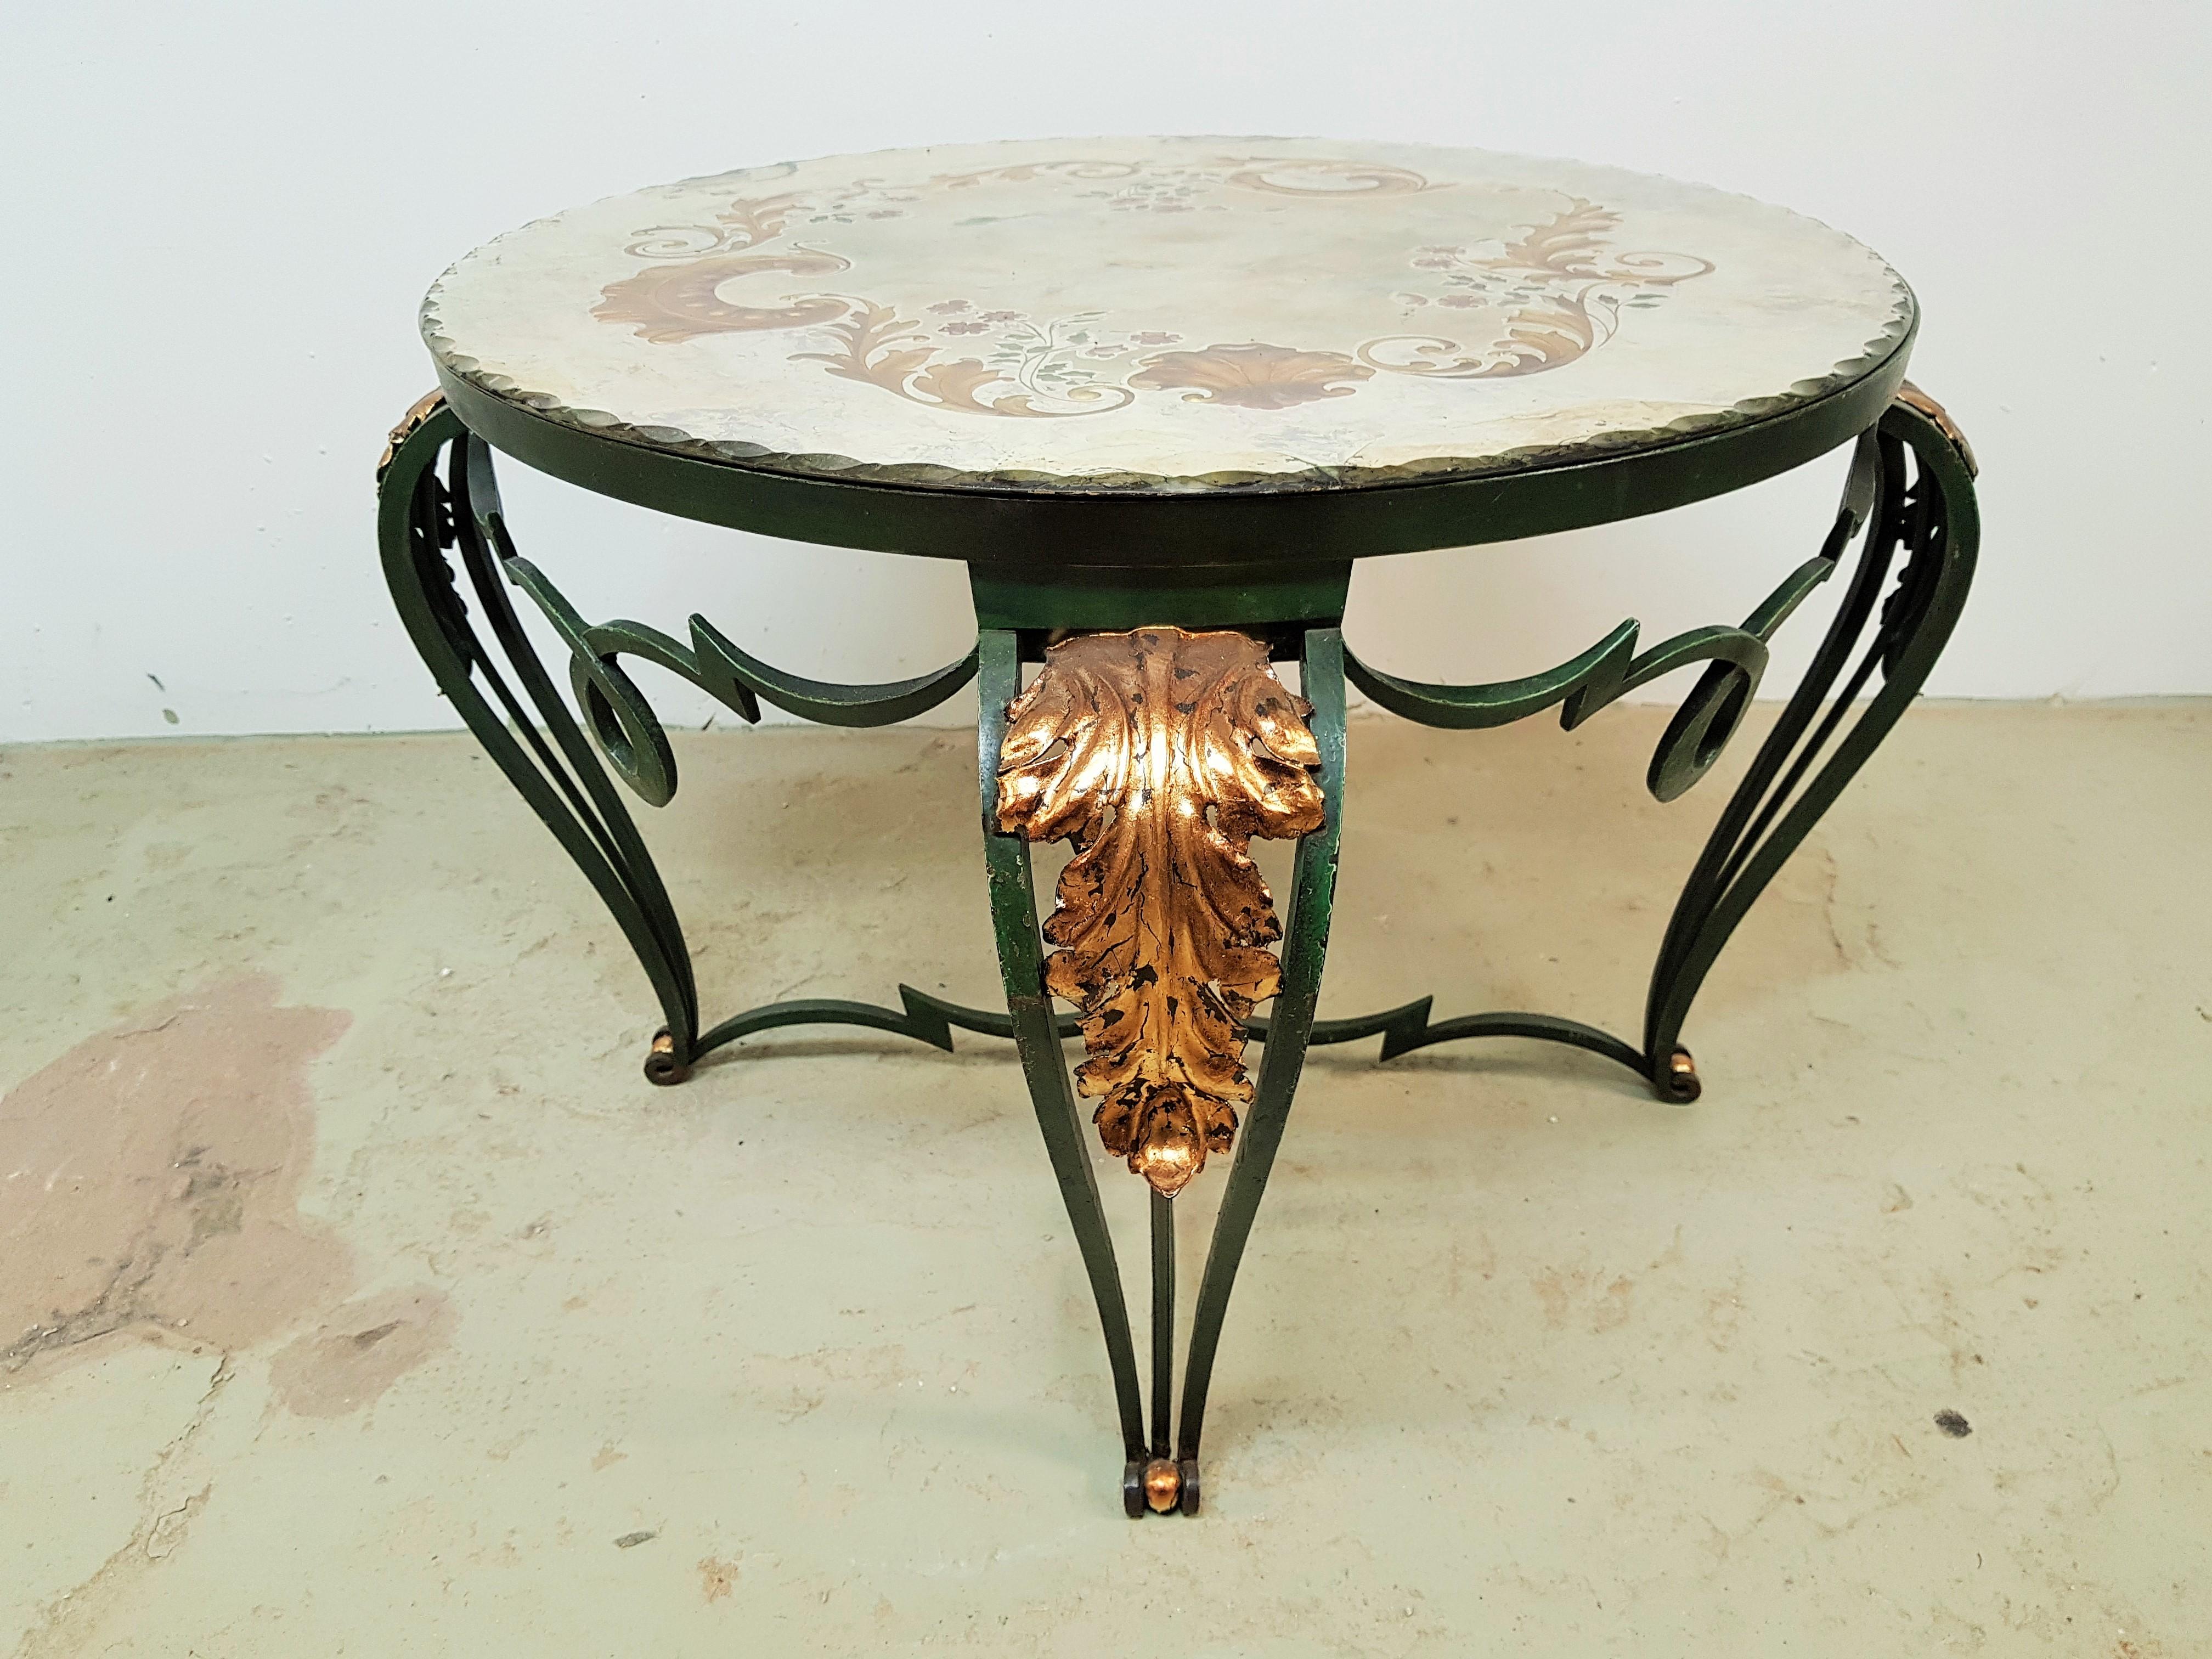 Wrought iron Art Deco table with églomisé Mirror by Rene Drouet, France, 1940. Dark green lacquer, gold leaf details. Mirror signed by artist.